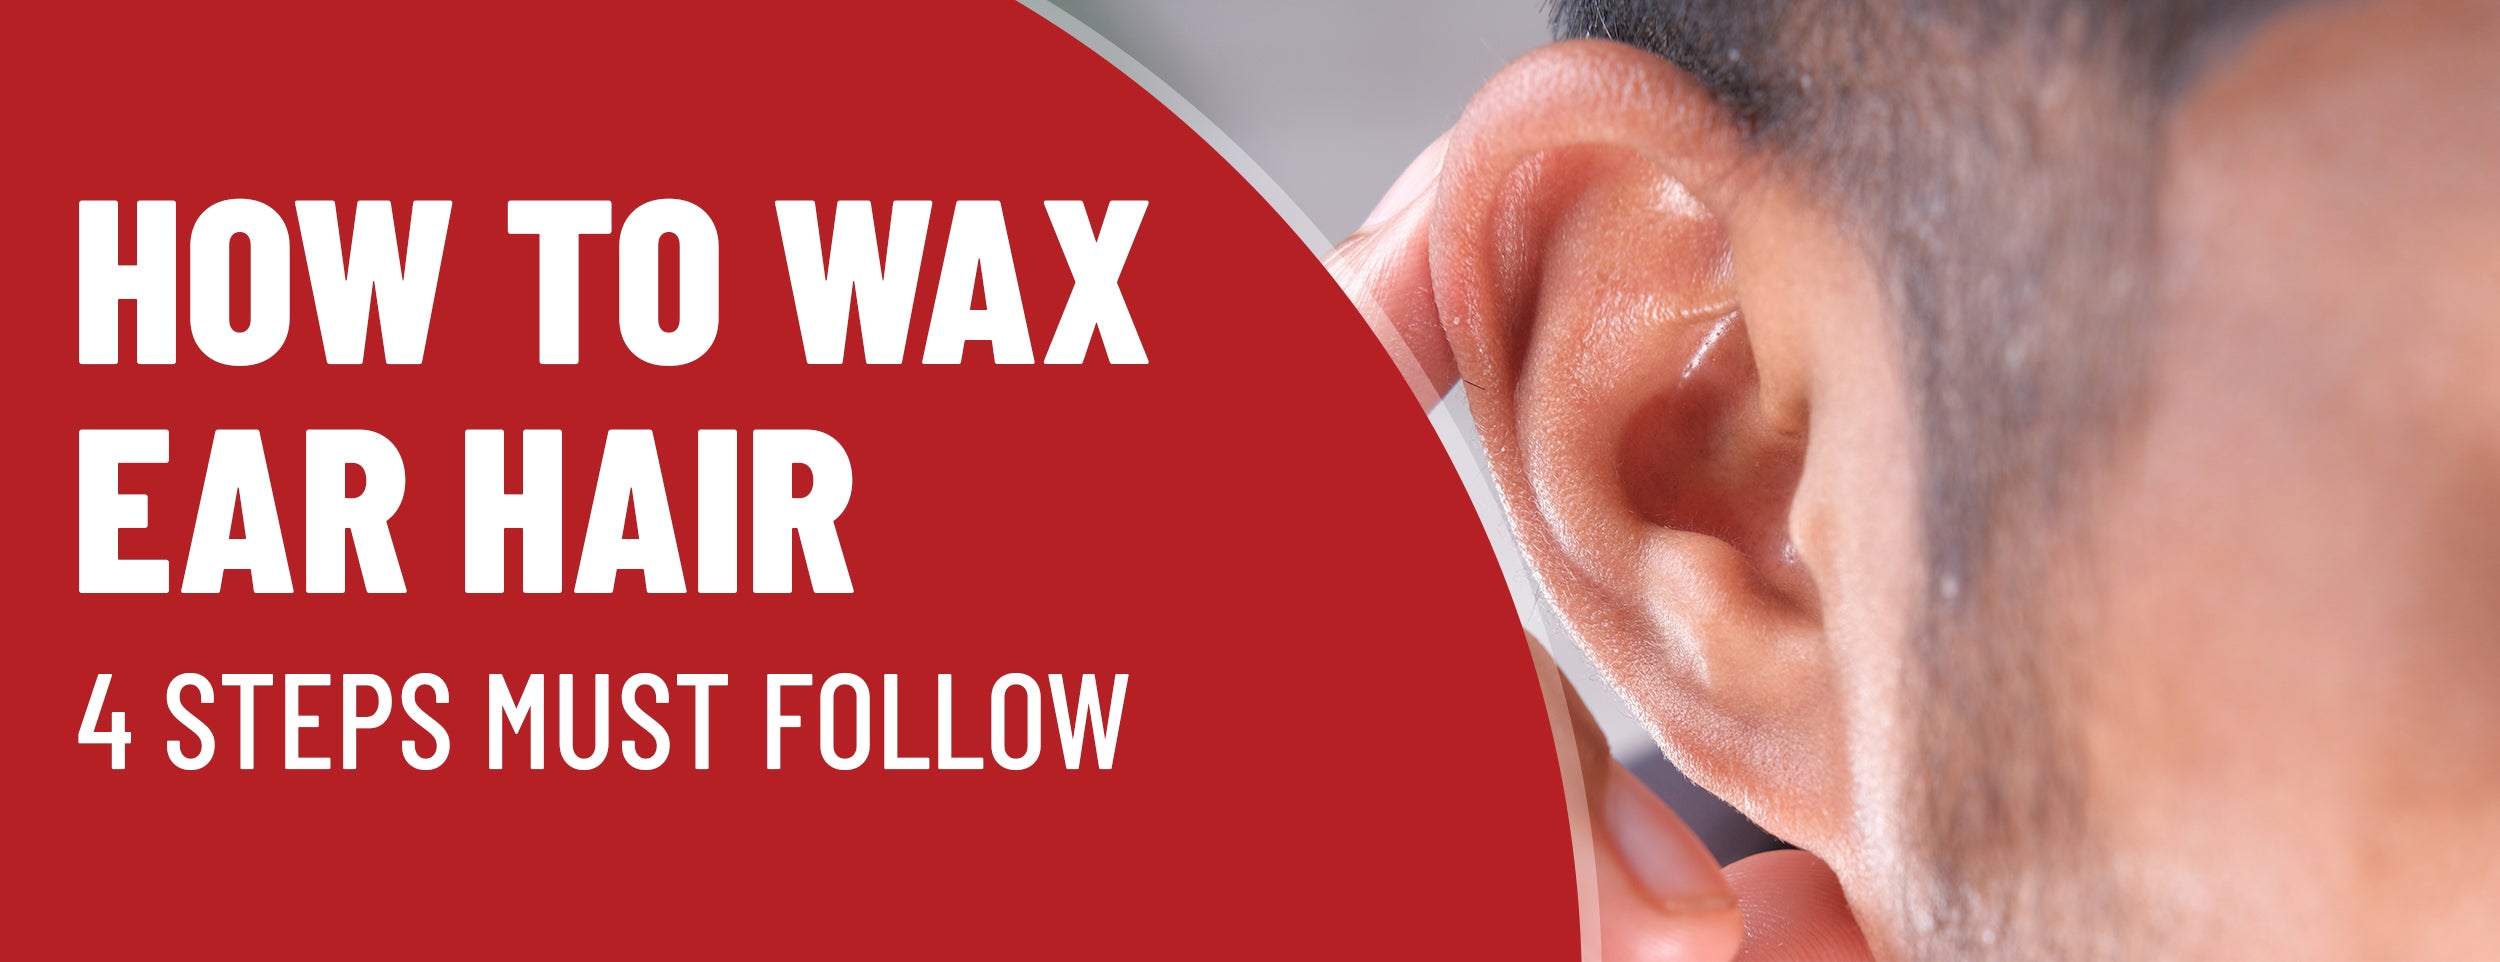 A step-by-step guide to waxing ear hair